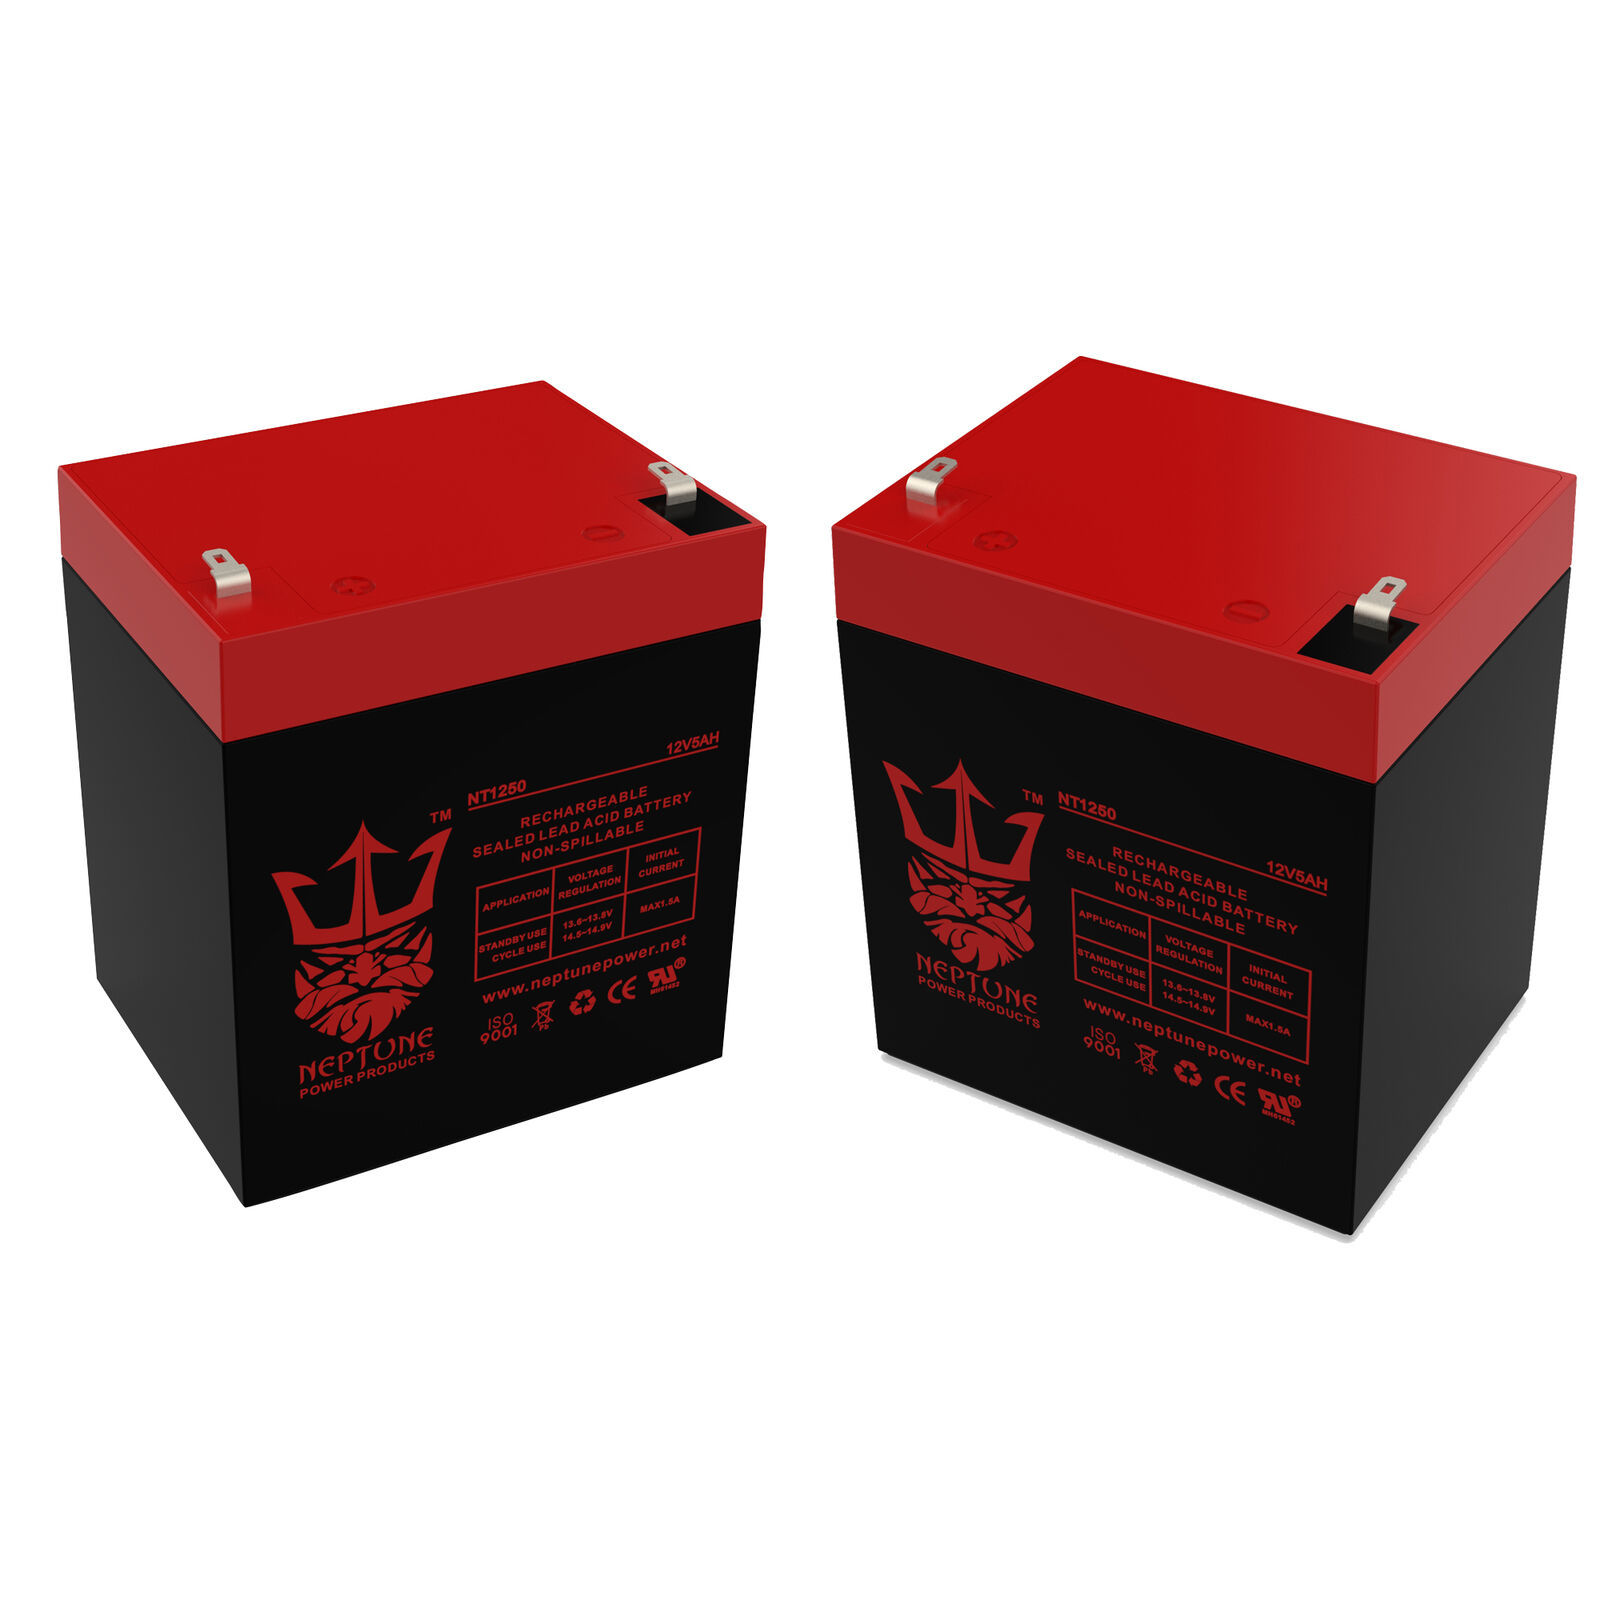 Primary image for Bladez Ion 150 12V 5Ah Replacement Electric Scooter Battery by Neptune -2 Pack